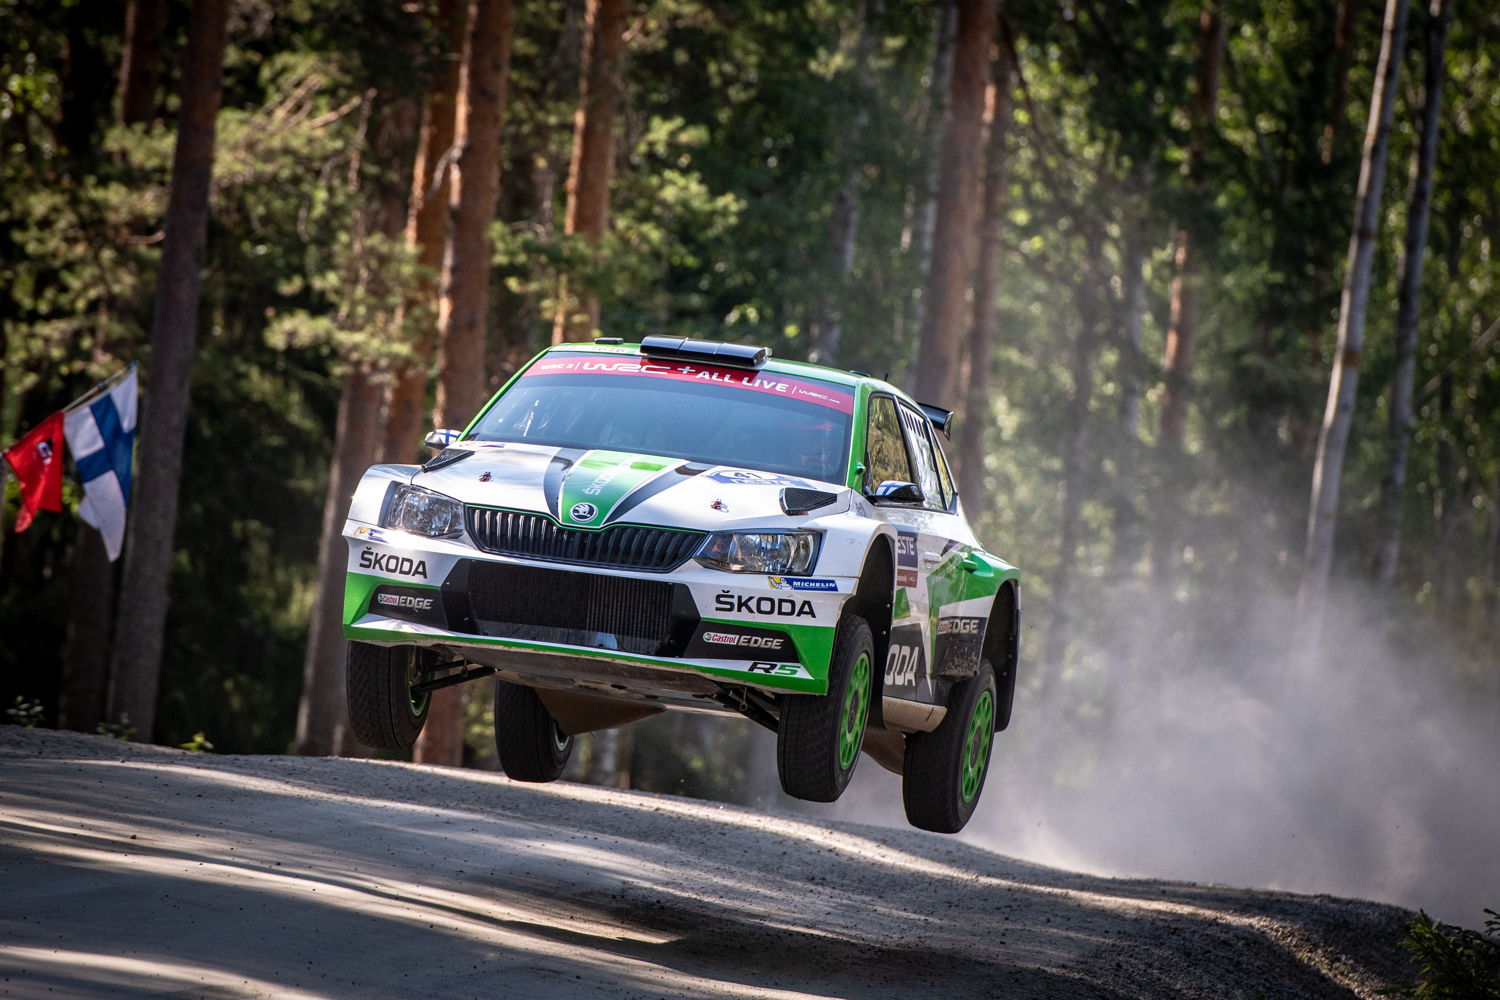 With a good result, Kalle Rovanperä and co-driver Jonne Halttunen (ŠKODA FABIA R5) want to conquer the lead in the WRC 2 Pro category standings